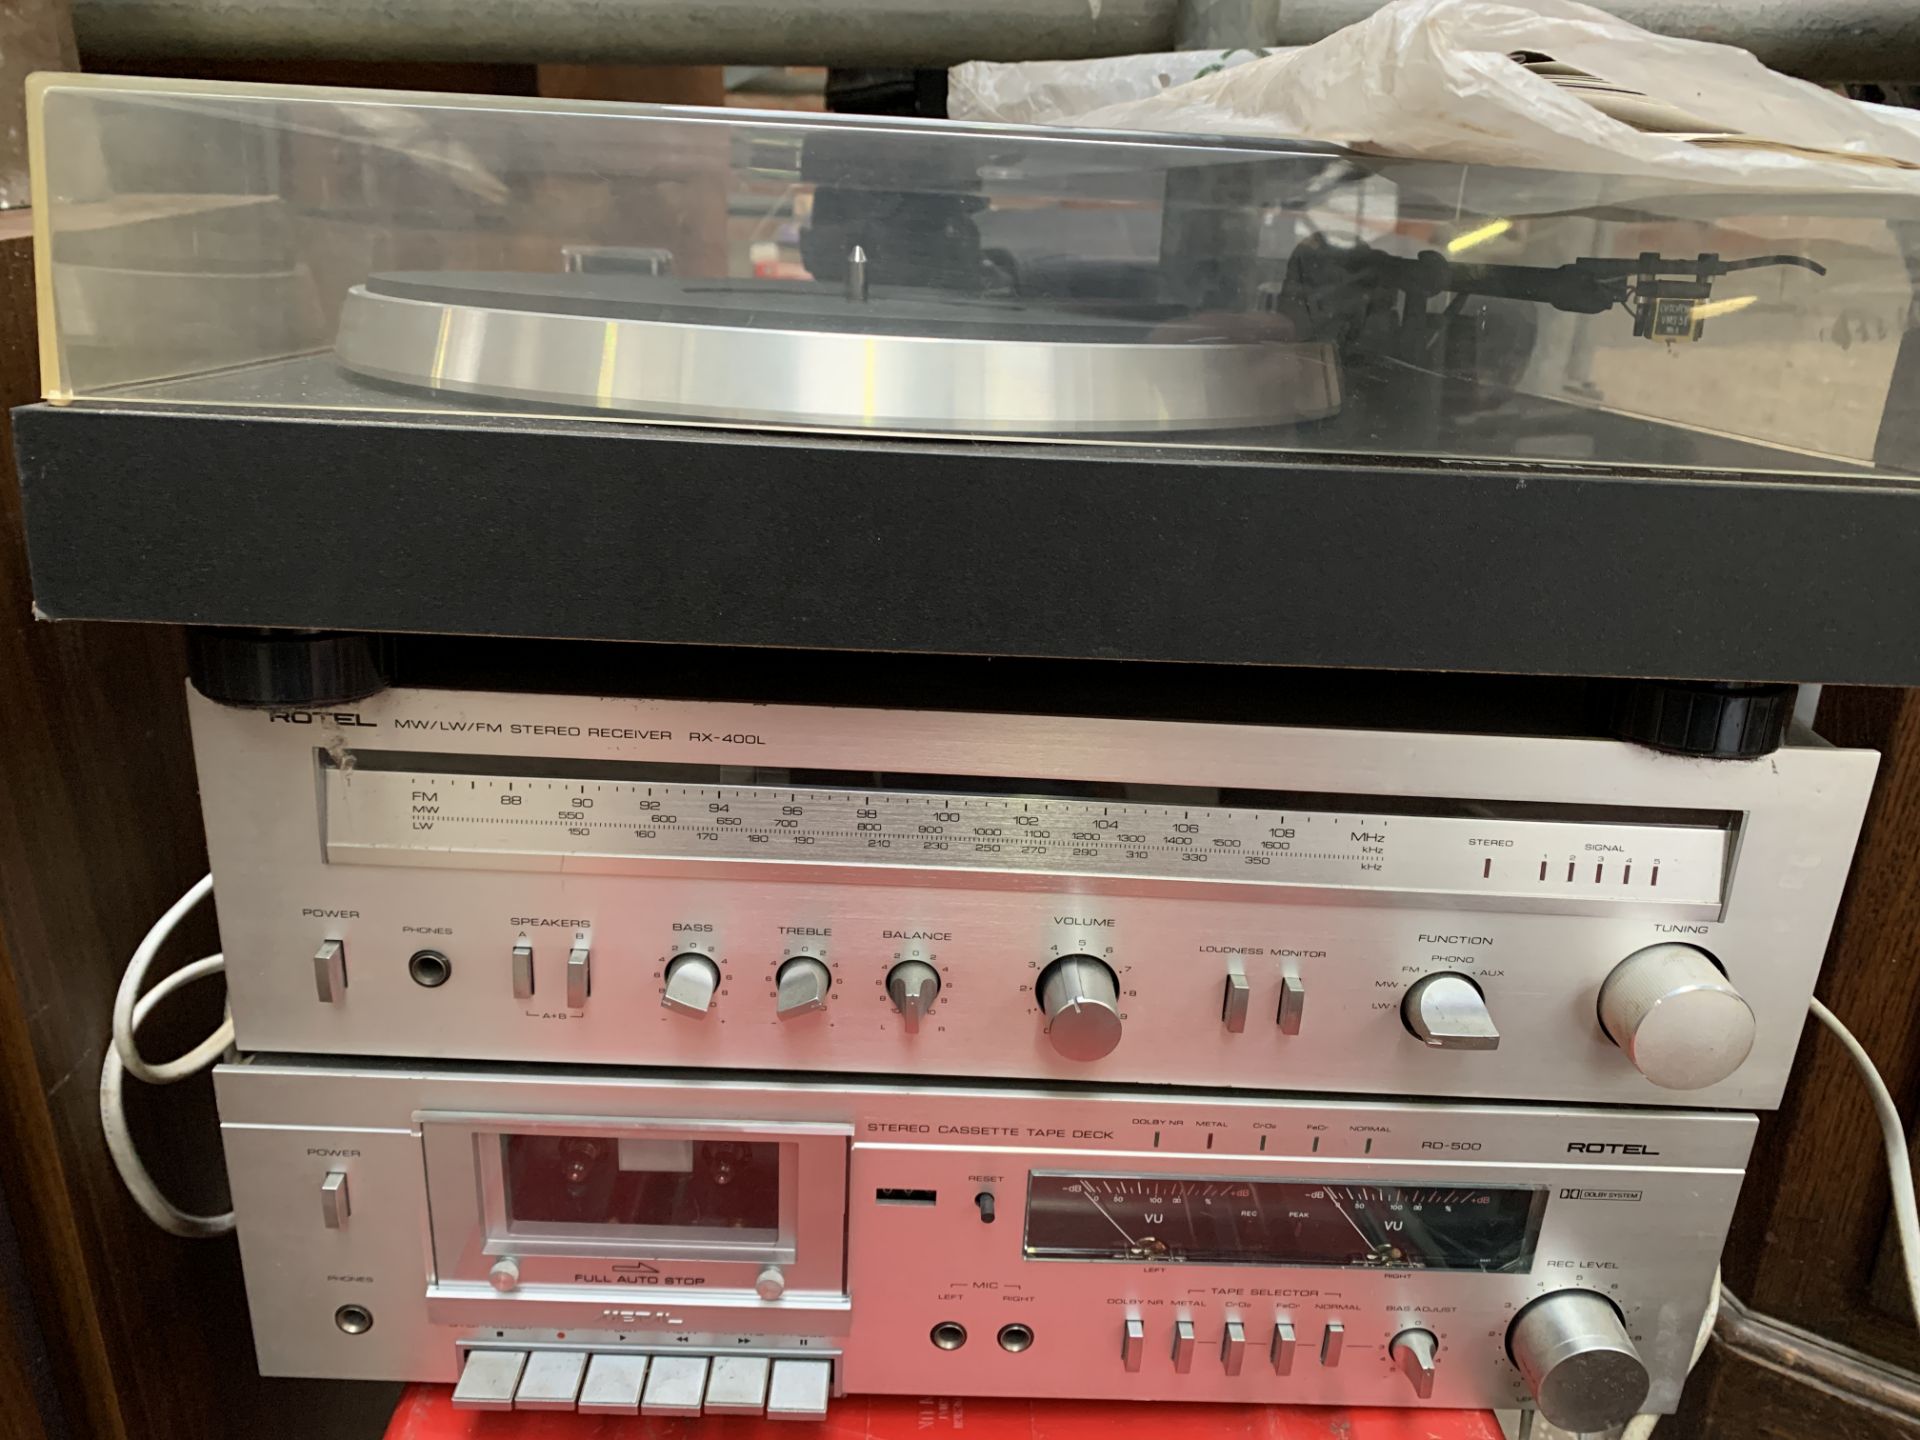 Routel turntable, tuner and cassette deck with 4 Wharfedale speakers